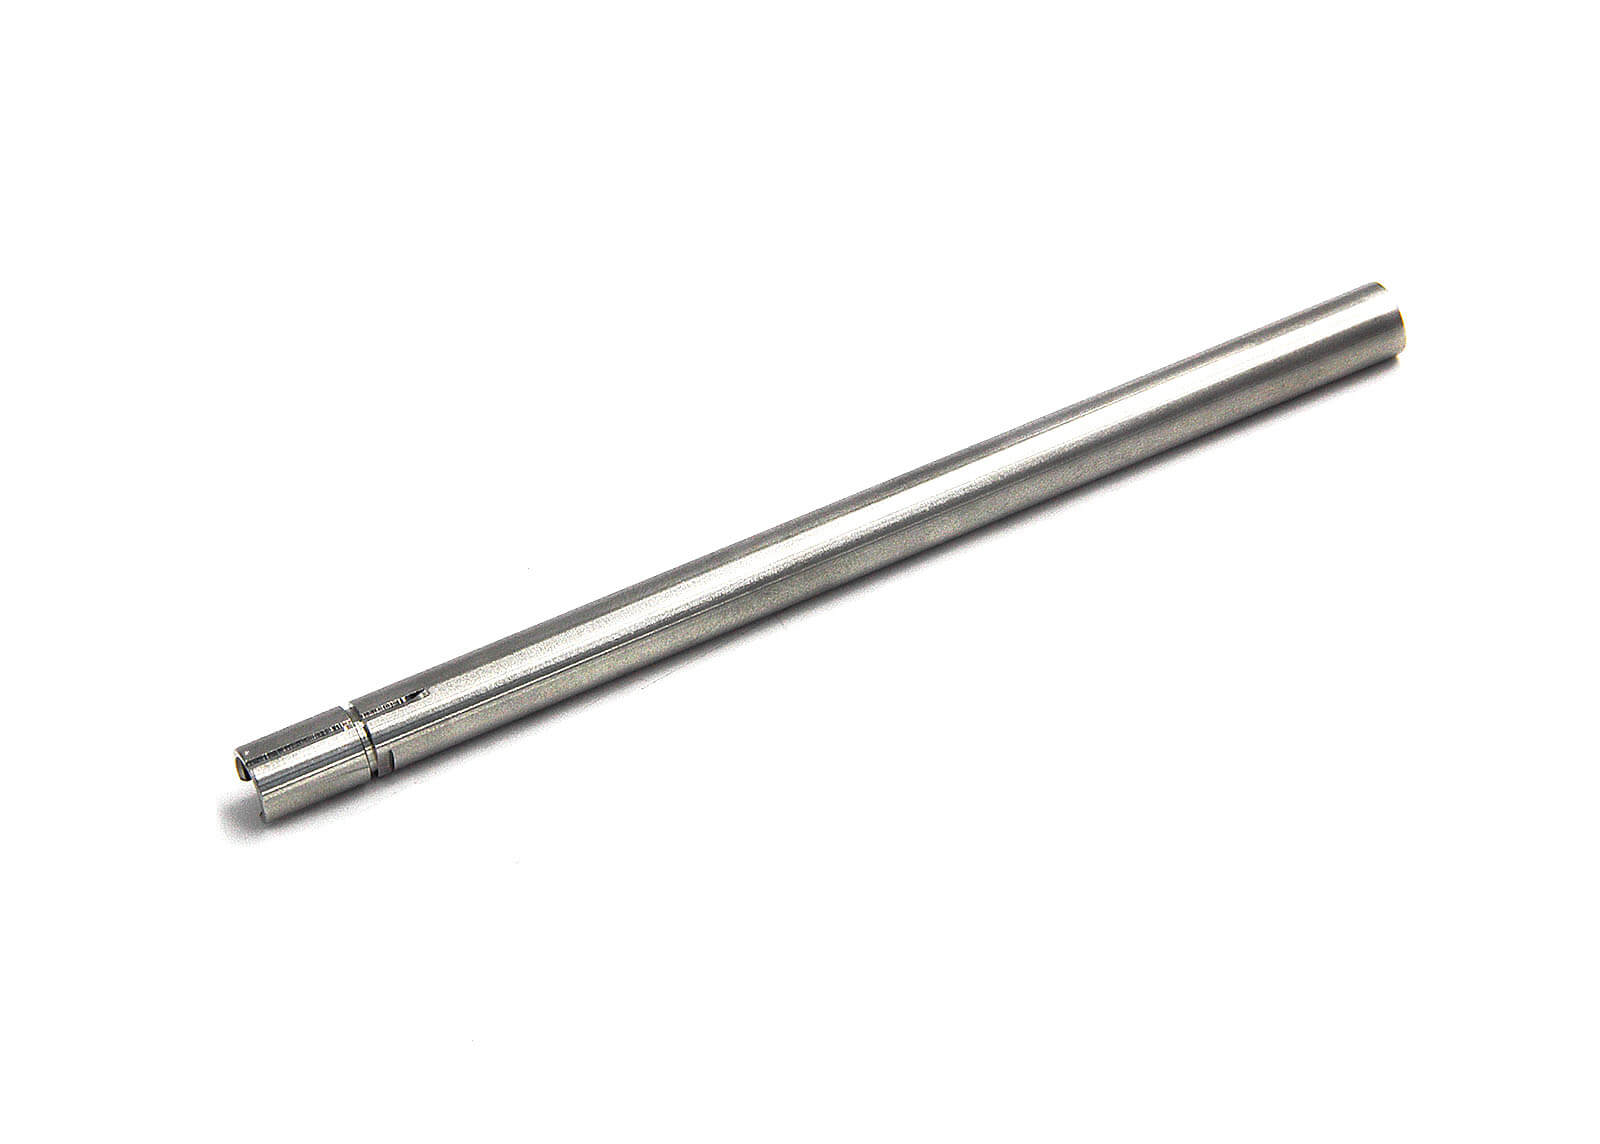 Stainless Steel 6.03mm Precision GBB Inner Barrel 136mm - Modify Airsoft Parts